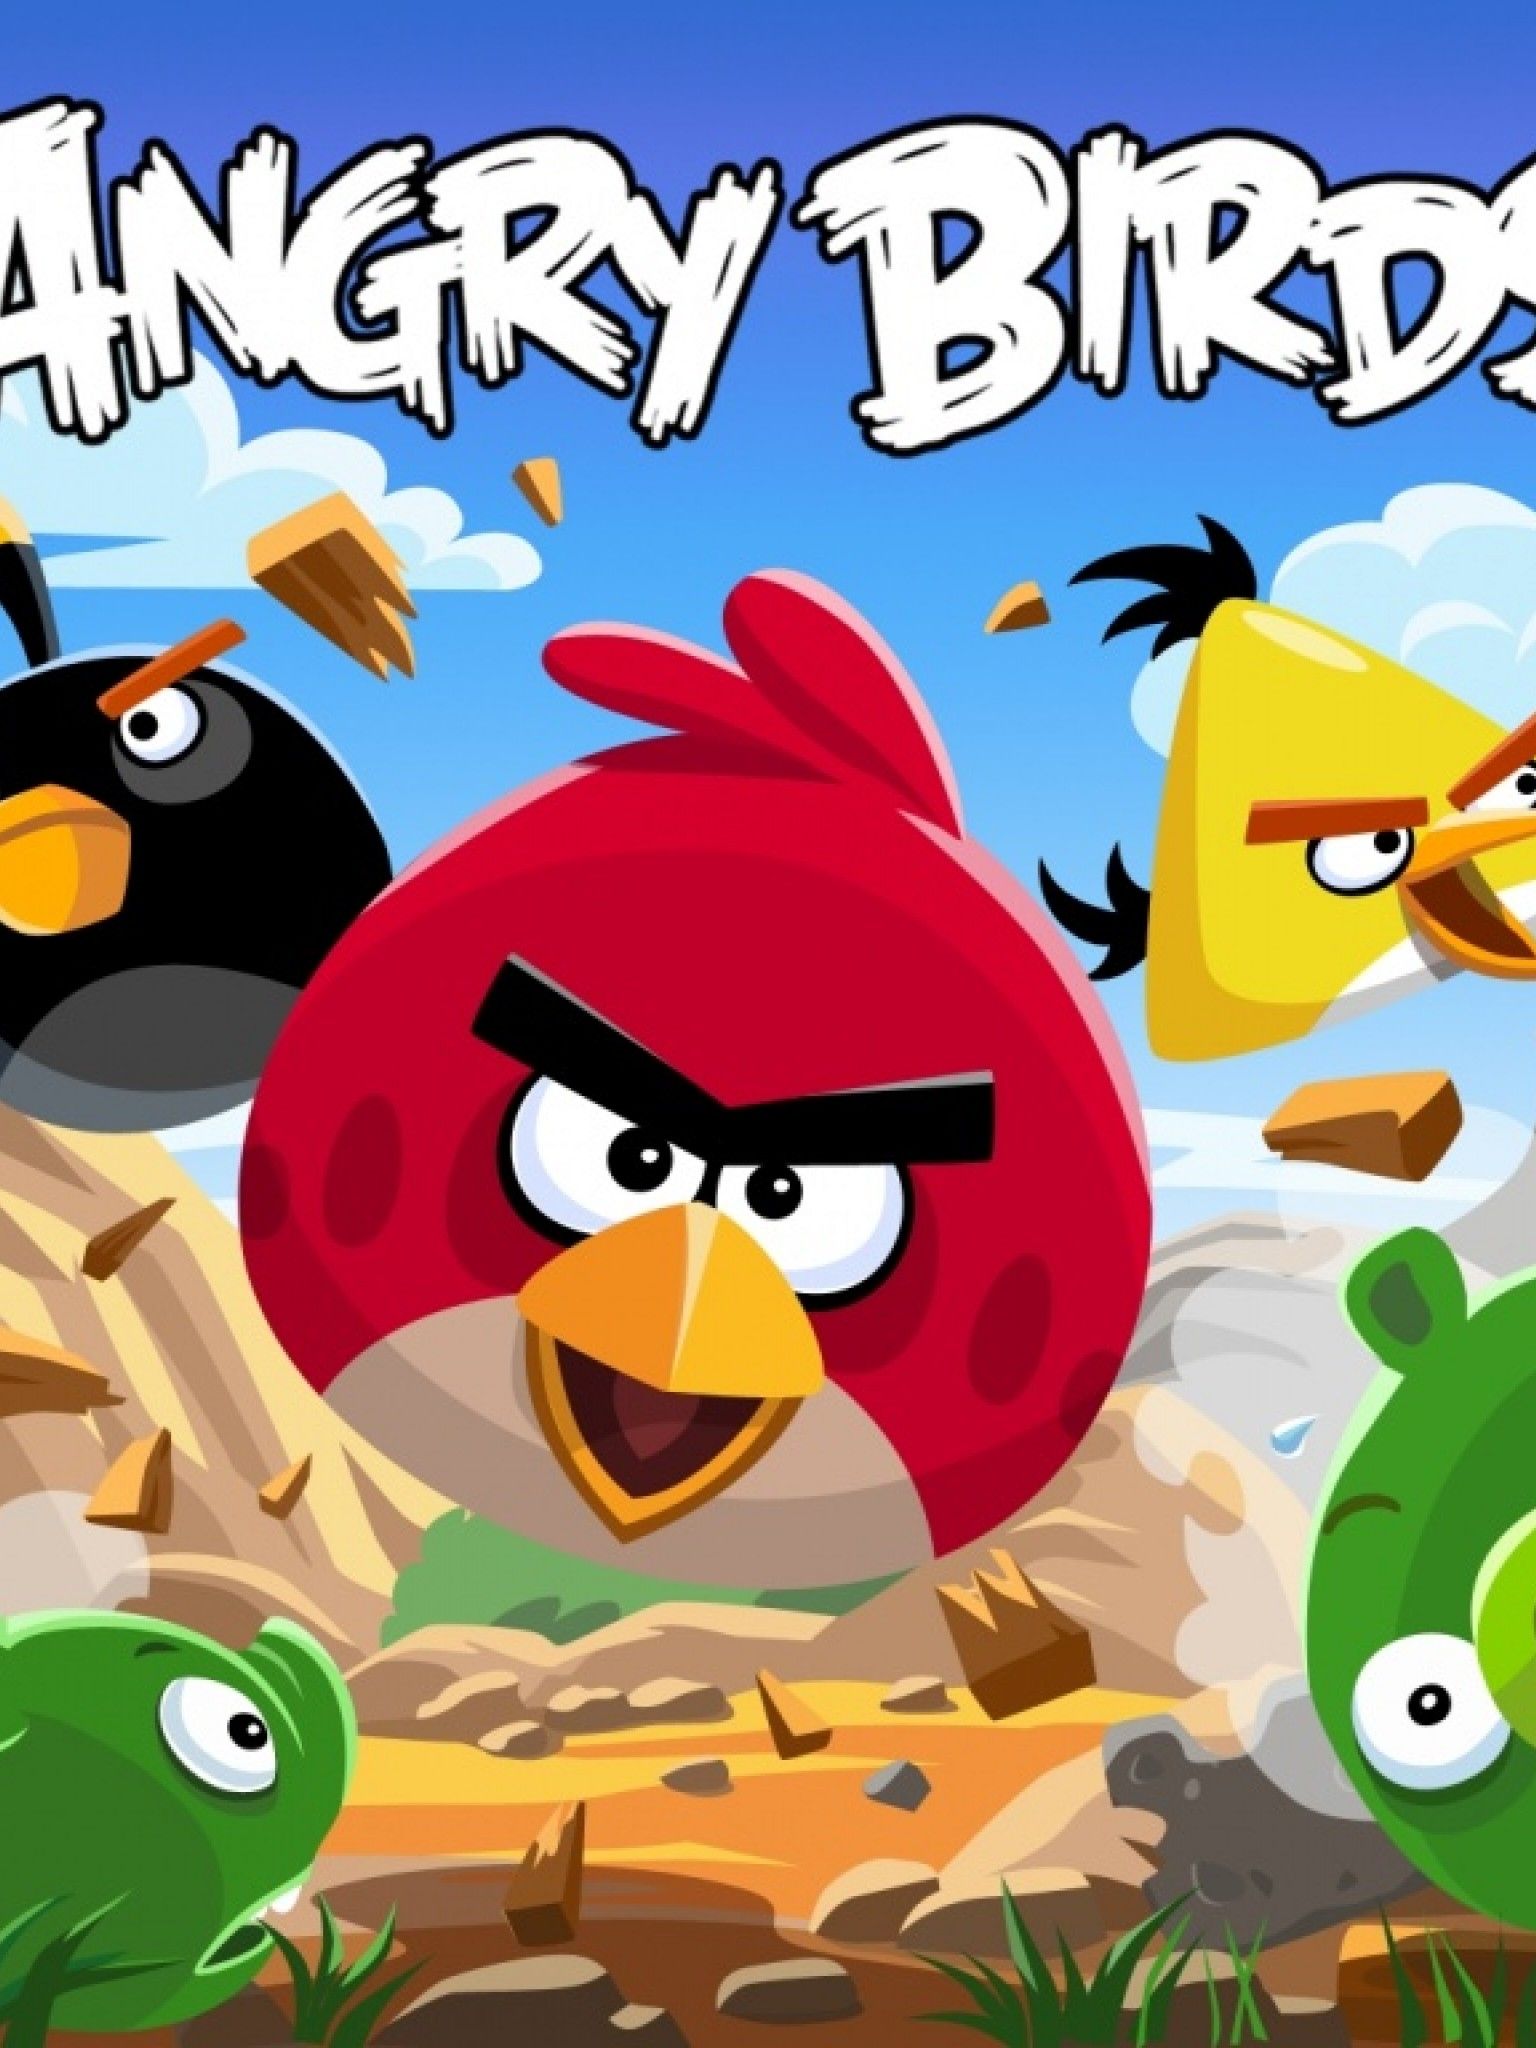 Free Download Angry Birds HD Wallpaper for Desktop and Mobiles Retina iPad